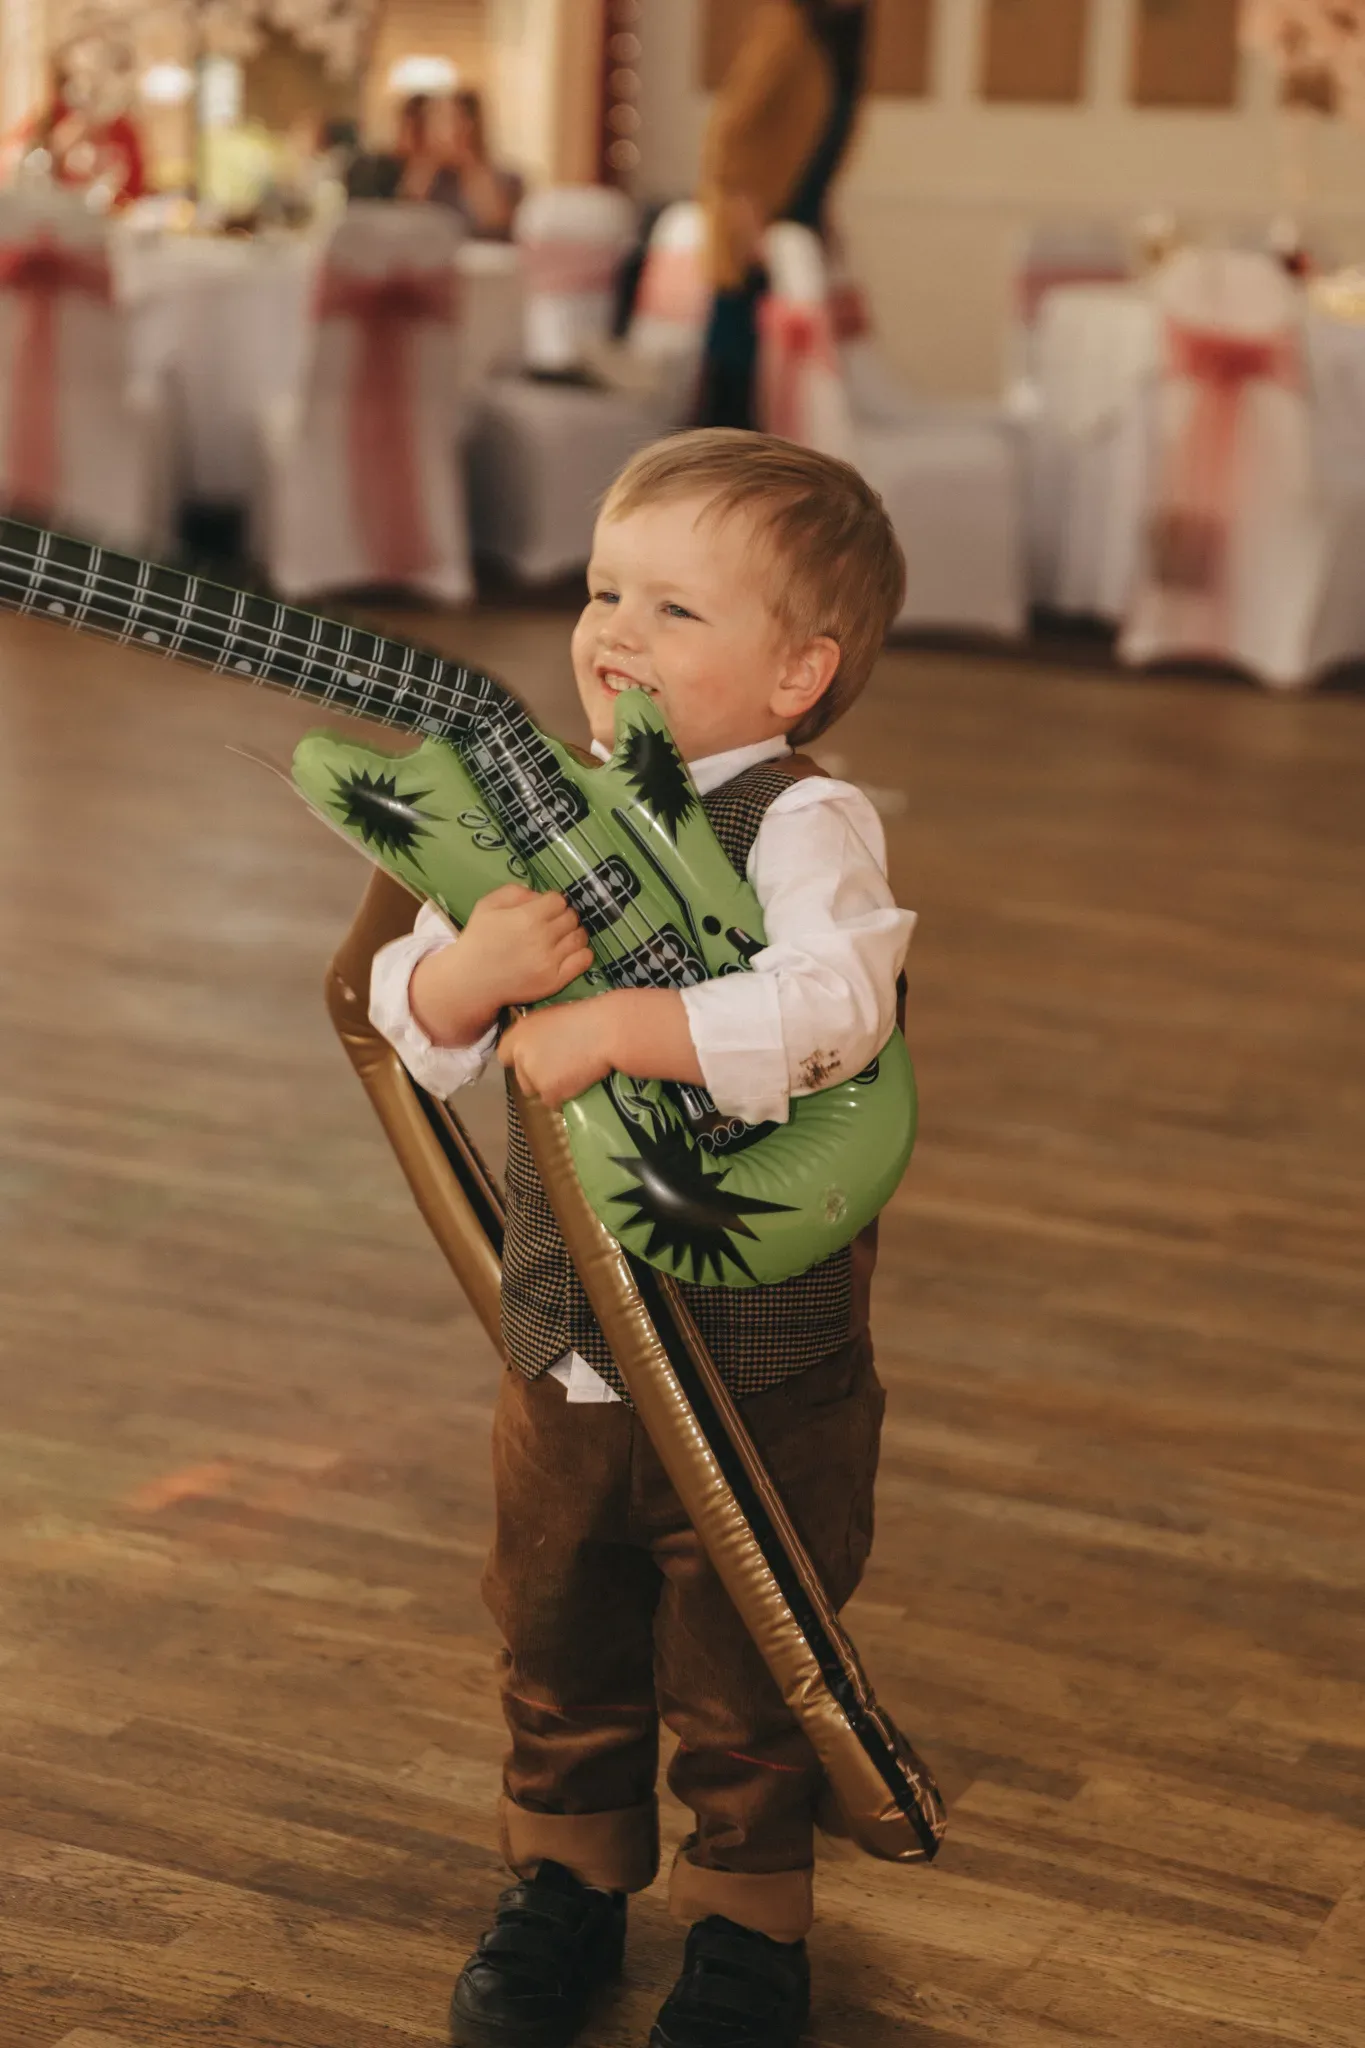 A young boy in a white shirt, vest, and brown pants, enthusiastically holding a large inflatable green guitar at a festive indoor event.